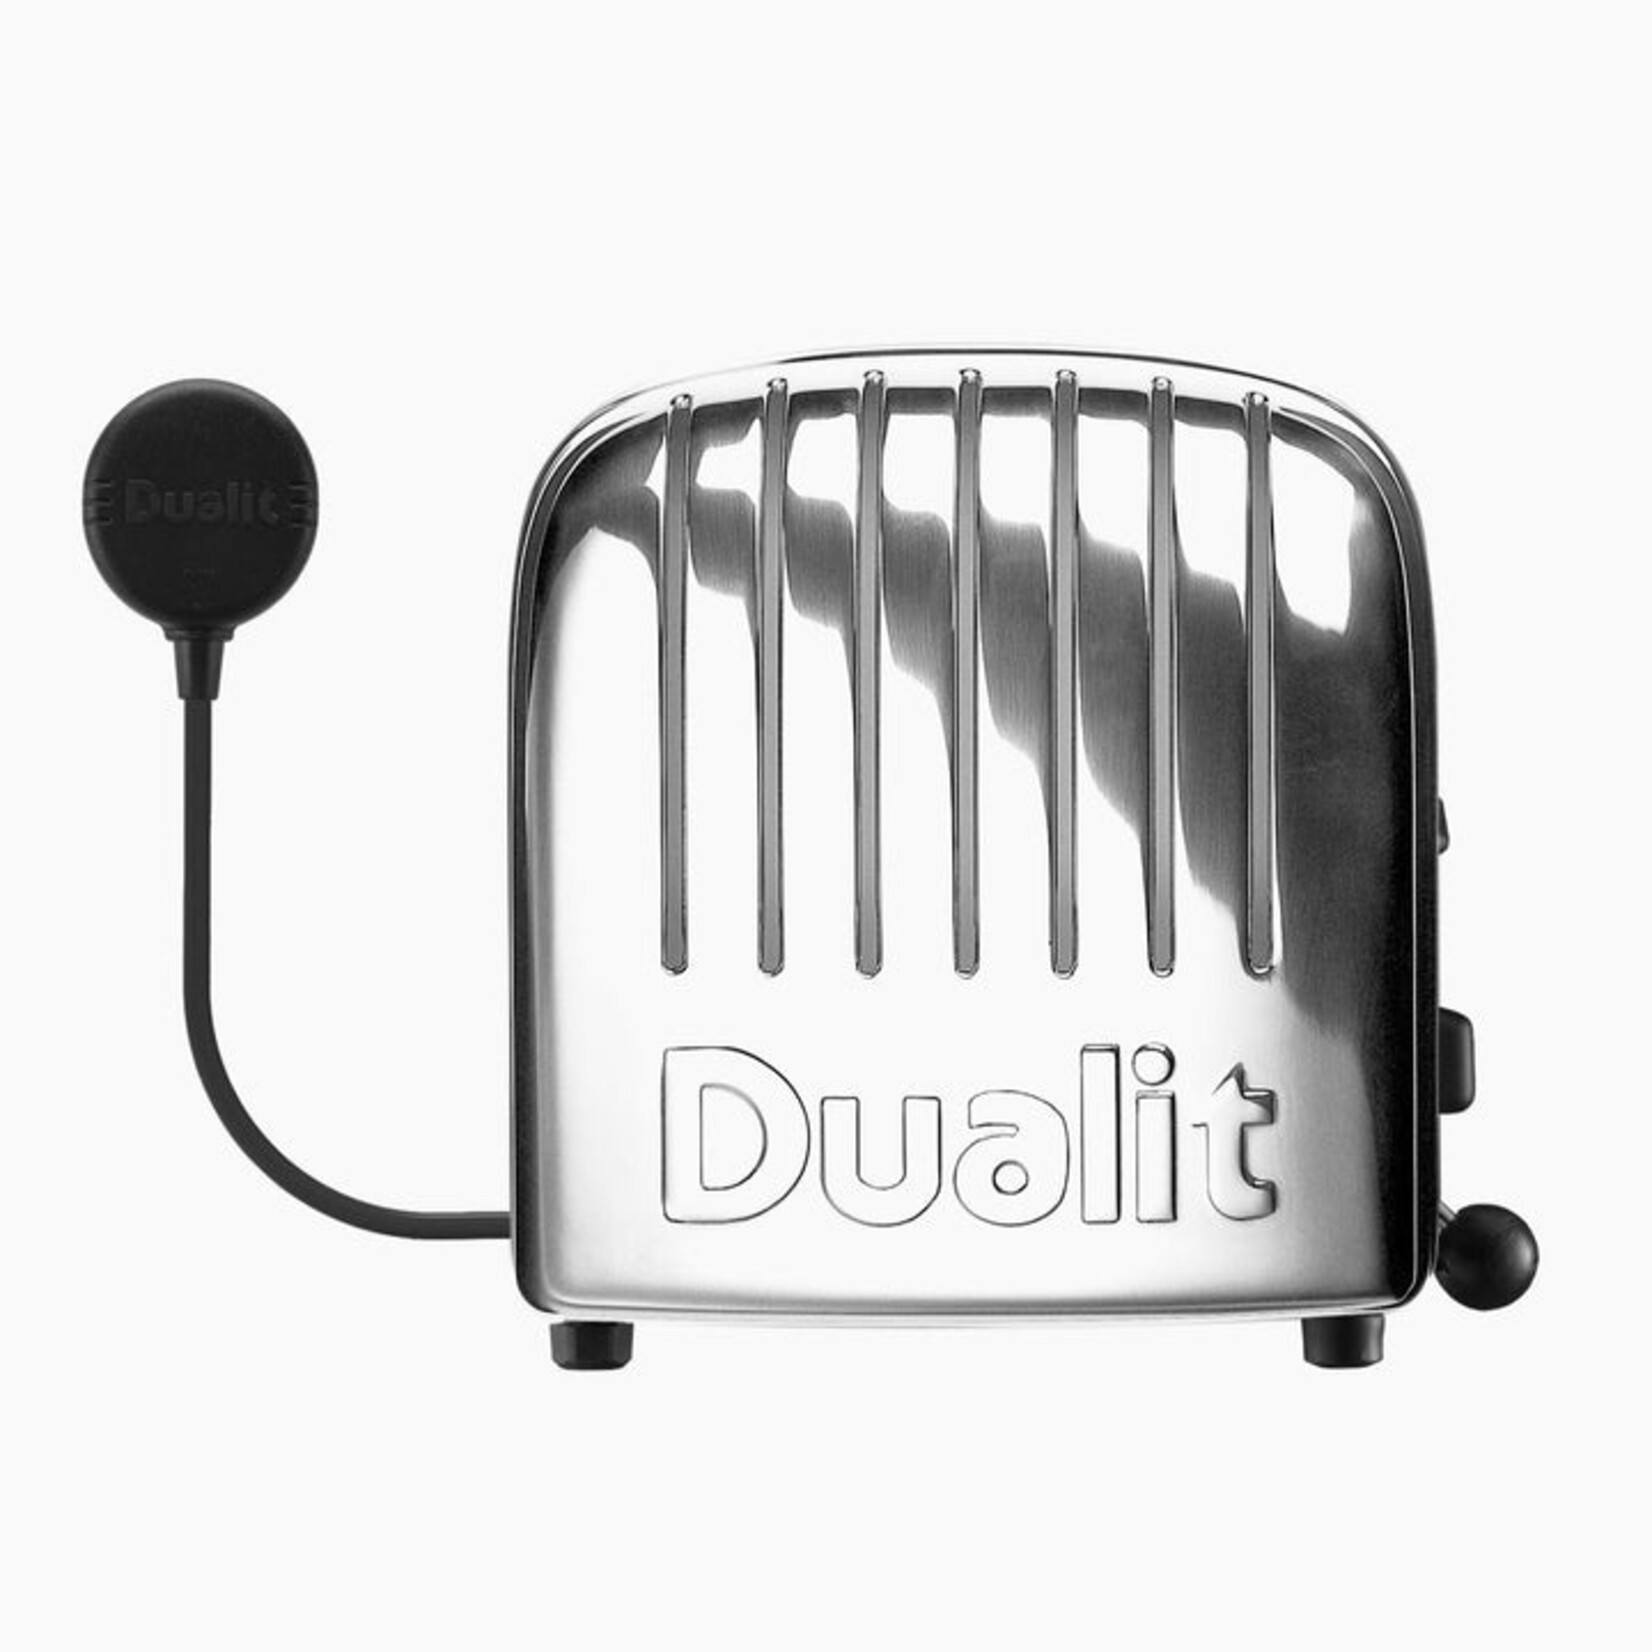 DUALIT Grille-pain 4 tranches chrome poli